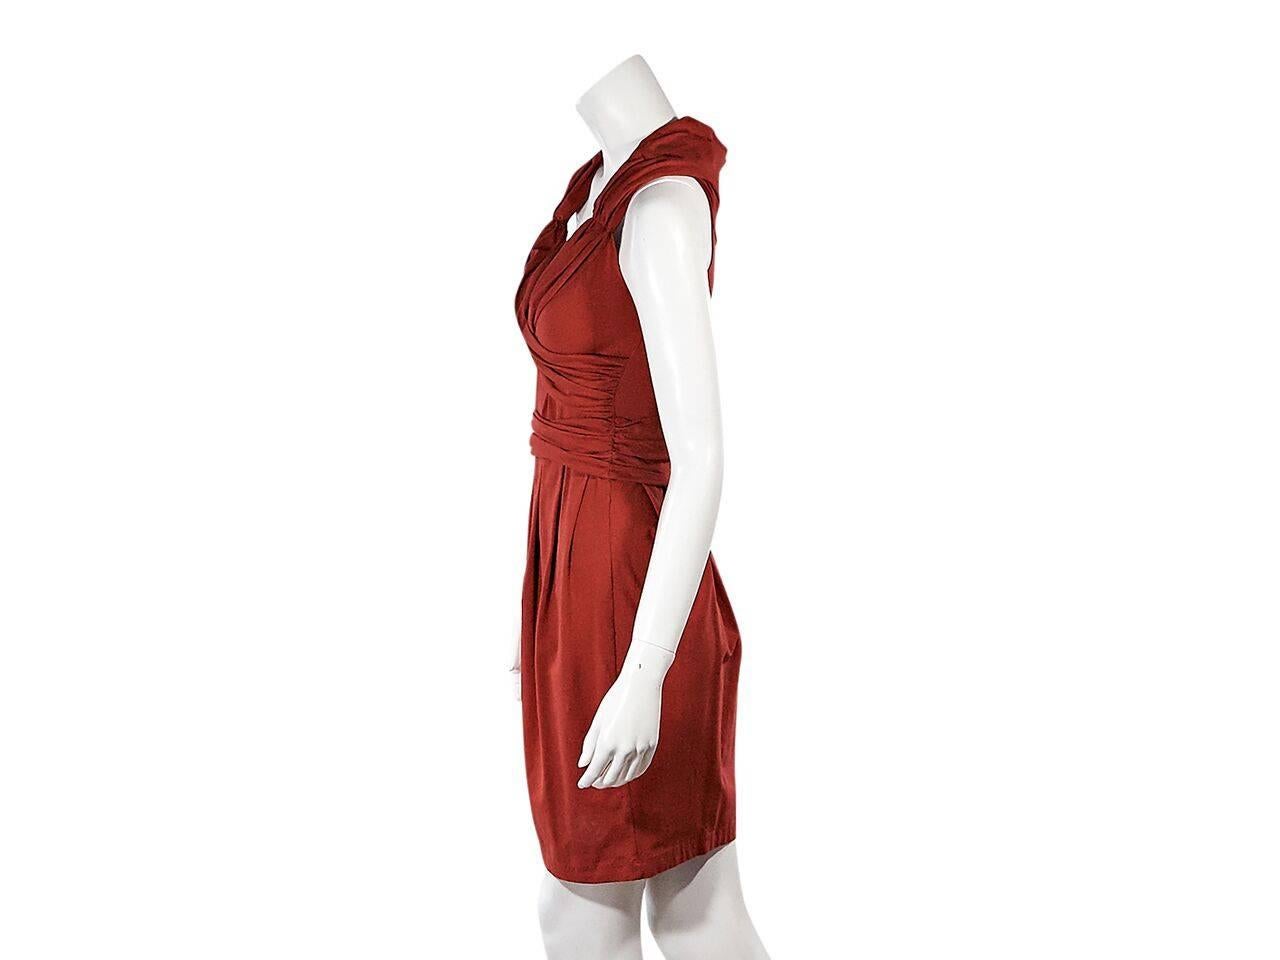 Product details:  Red gathered dress by Prada.  Scoponeck.  Faux wrap bodice.  Gathered waist.  Pleated skirting.  Pullover style.  
Condition: Pre-owned. Very good.
Est. Retail $ 978.00